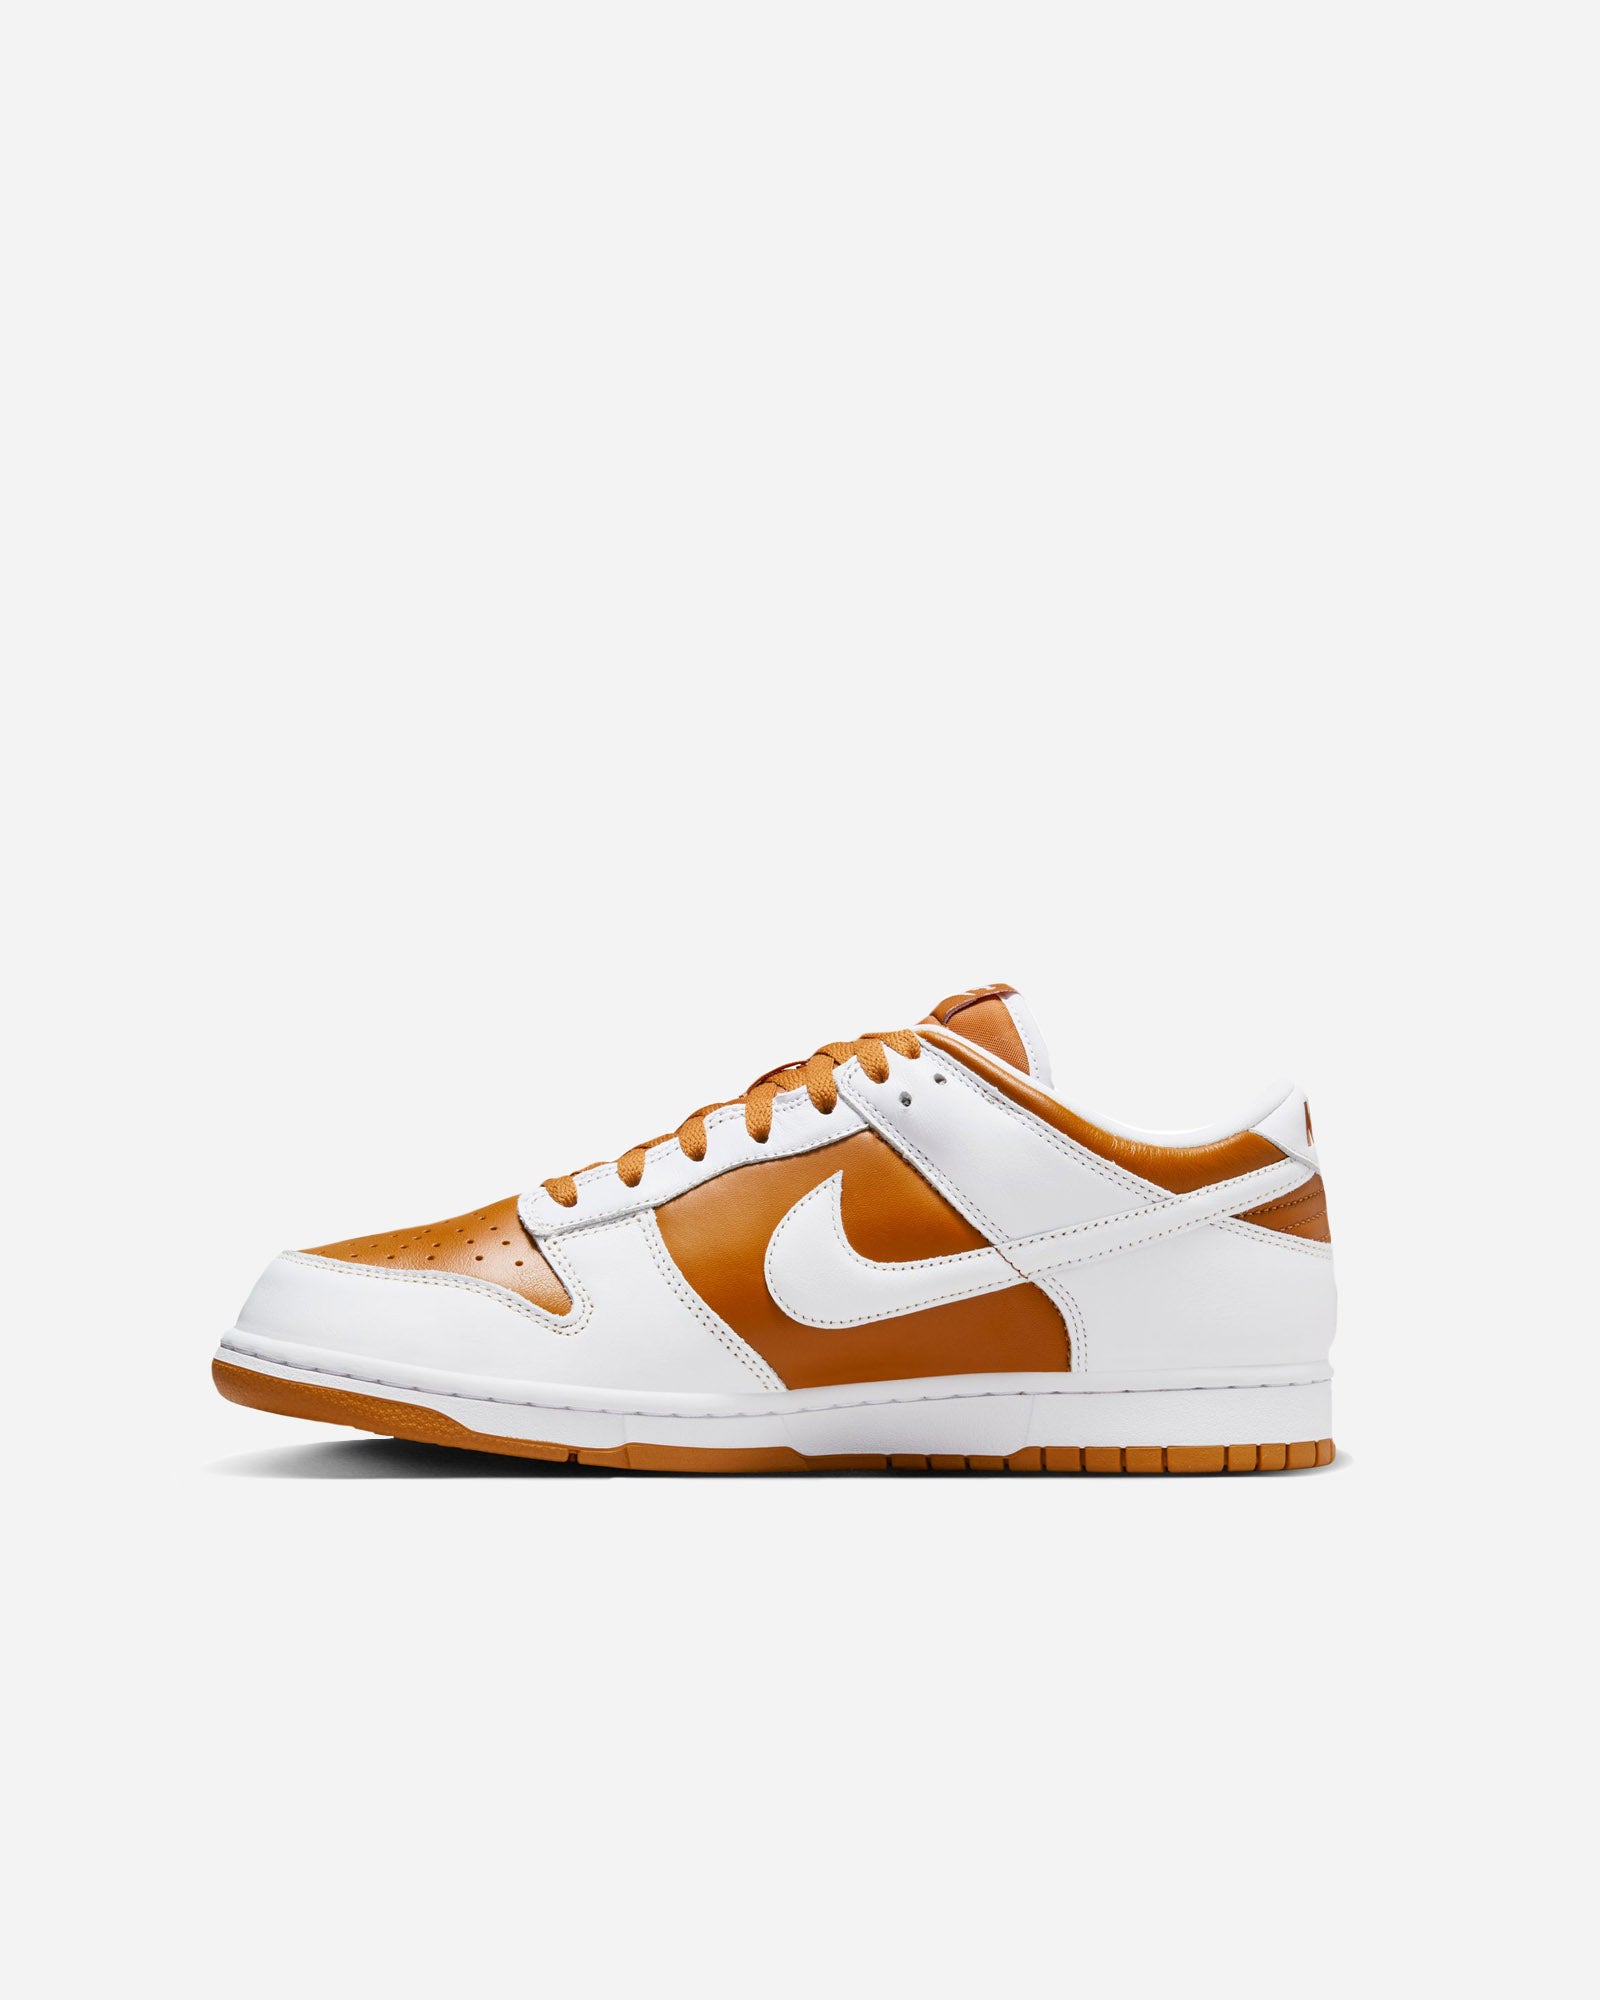 Nike Dunk Low QS Dark Curry image